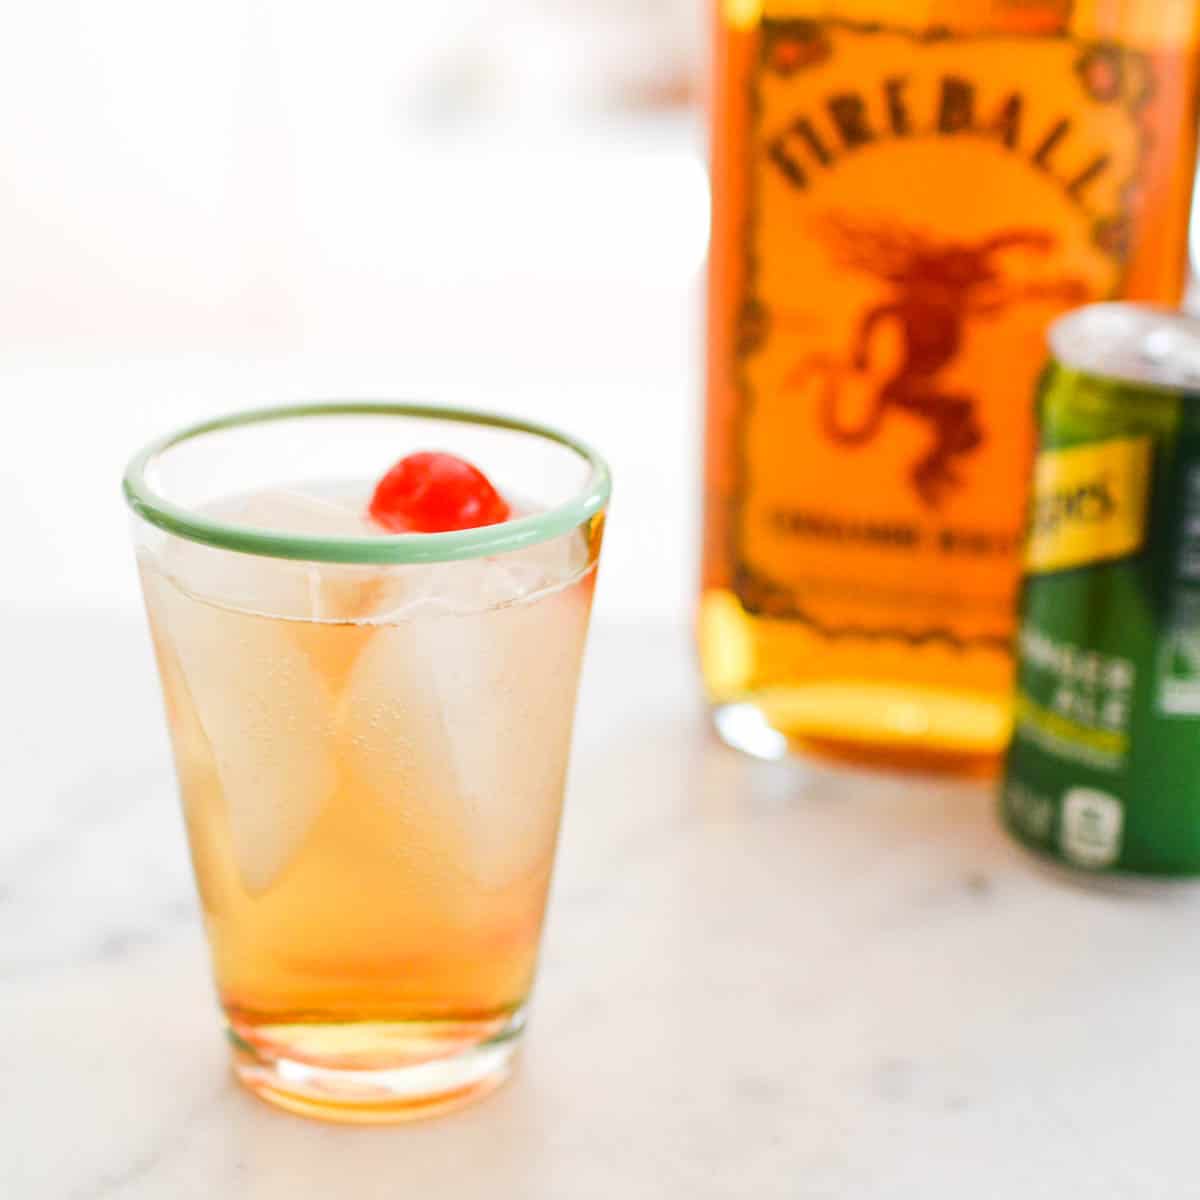 filosof Sparsommelig tynd 2-Ingredient Fireball and Ginger Ale Cocktail Recipe